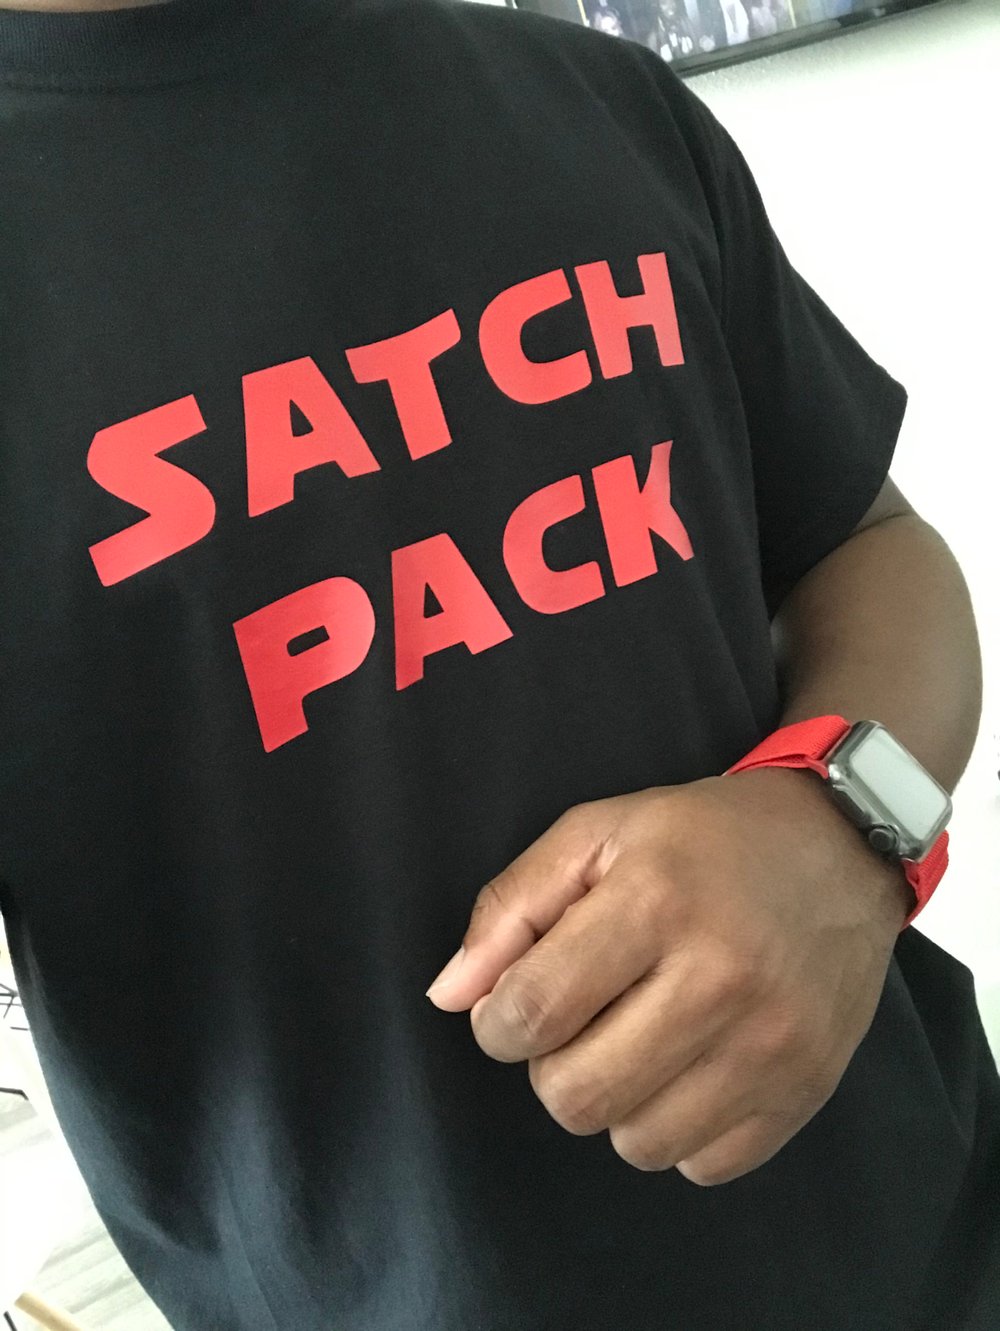 Satch Pack T-Shirt - Black/Red 